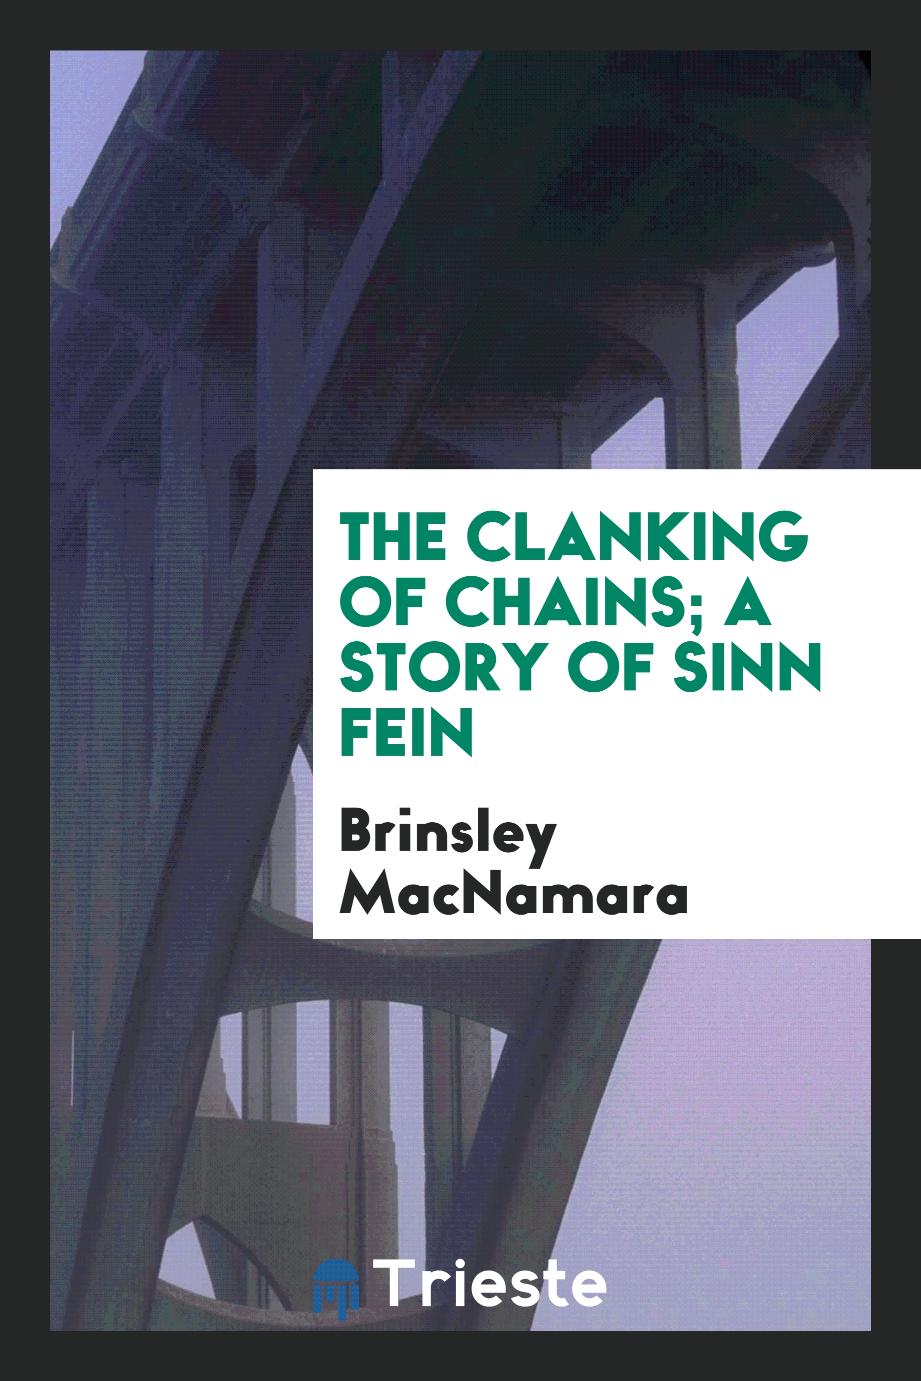 The clanking of chains; a story of sinn fein